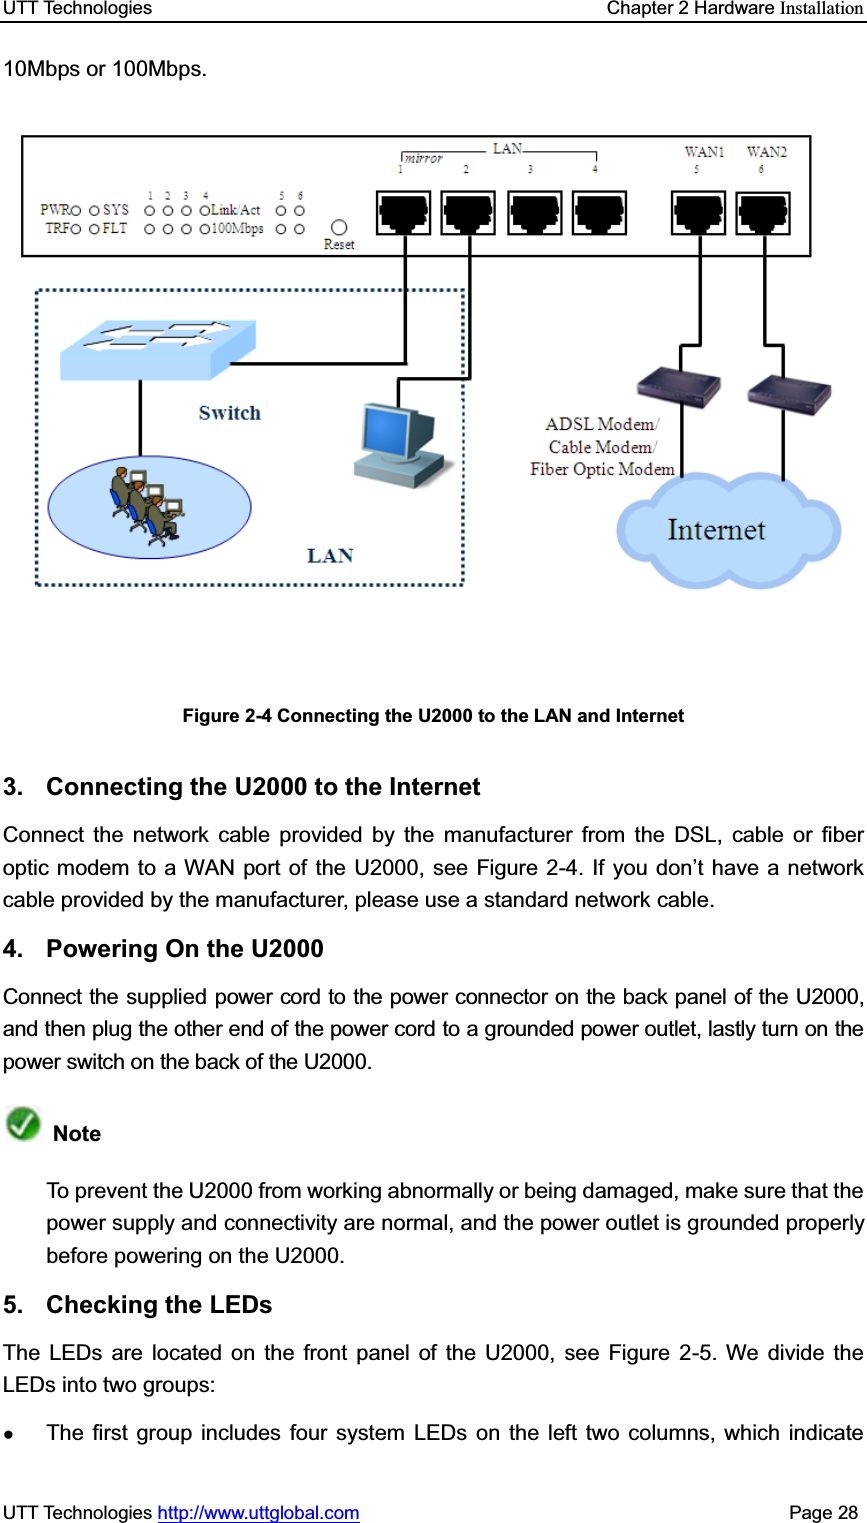 UTT Technologies    Chapter 2 Hardware InstallationUTT Technologies http://www.uttglobal.com                                              Page 28 10Mbps or 100Mbps. Figure 2-4 Connecting the U2000 to the LAN and Internet3.  Connecting the U2000 to the Internet Connect the network cable provided by the manufacturer from the DSL, cable or fiber optic modem to a WAN port of the U2000, see Figure 2-4. If you don¶t have a network cable provided by the manufacturer, please use a standard network cable. 4.  Powering On the U2000 Connect the supplied power cord to the power connector on the back panel of the U2000, and then plug the other end of the power cord to a grounded power outlet, lastly turn on the power switch on the back of the U2000. NoteTo prevent the U2000 from working abnormally or being damaged, make sure that the power supply and connectivity are normal, and the power outlet is grounded properly before powering on the U2000. 5. Checking the LEDs The LEDs are located on the front panel of the U2000, see Figure 2-5. We divide the LEDs into two groups:   ƔThe first group includes four system LEDs on the left two columns, which indicate 